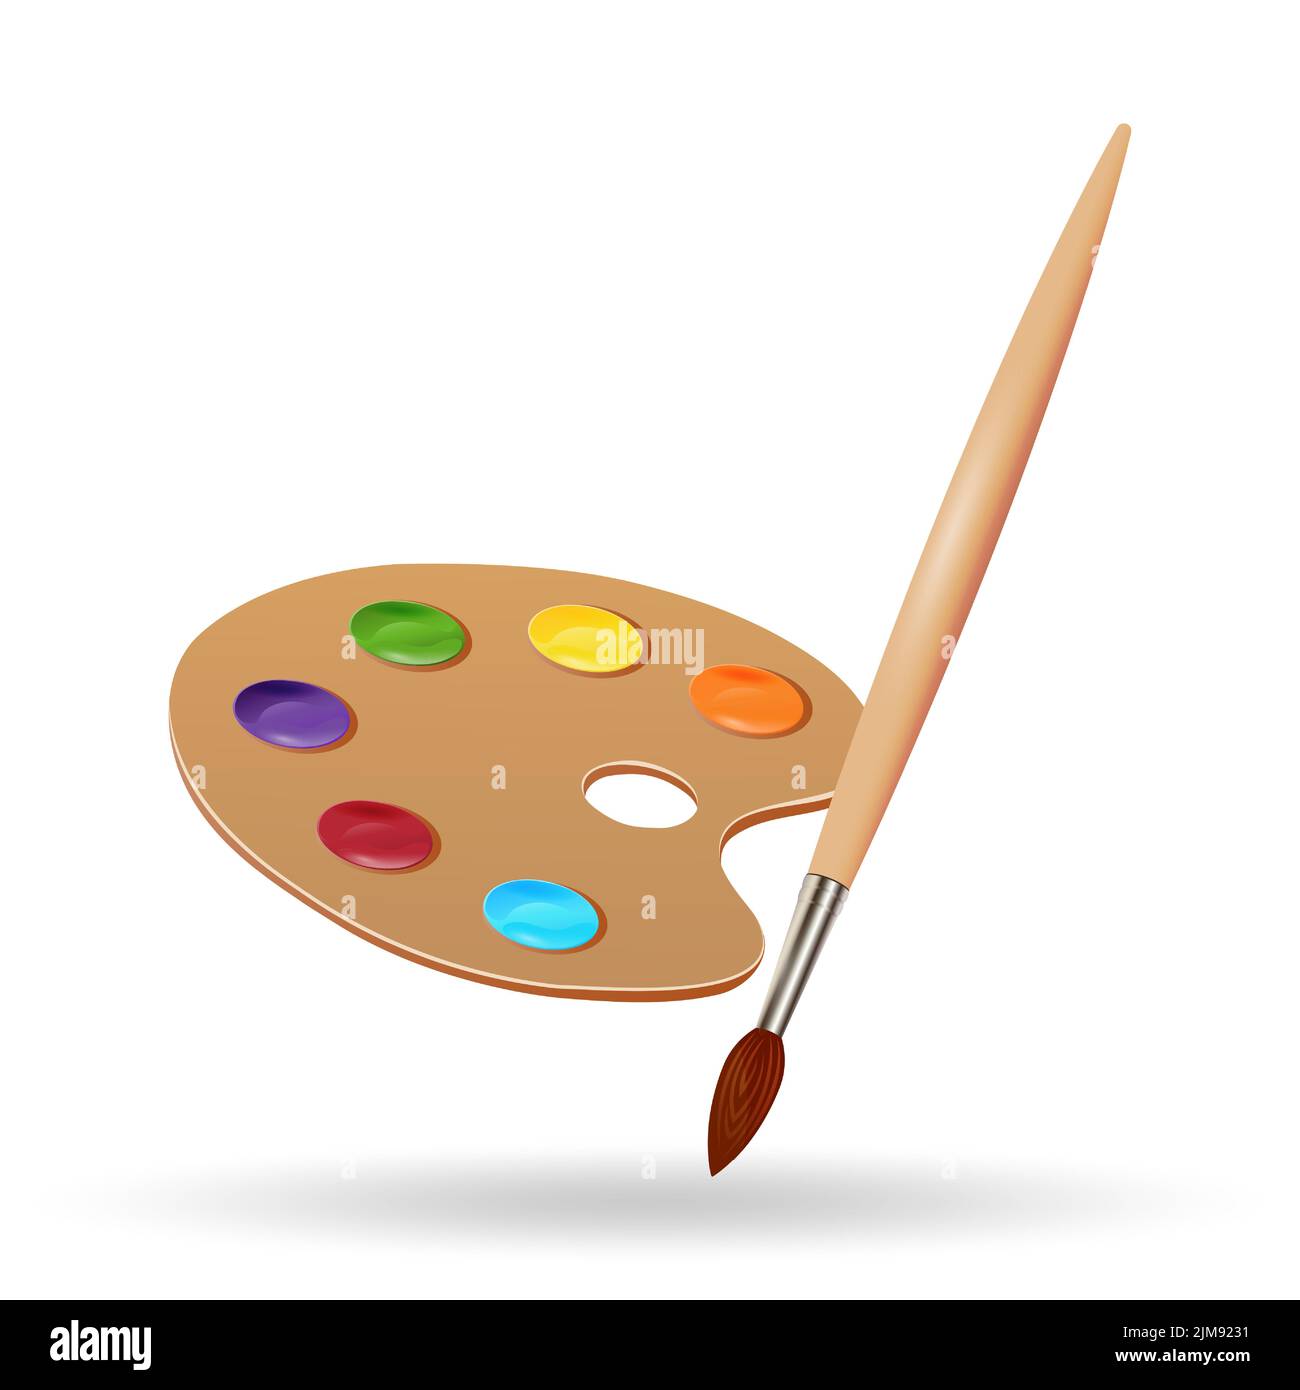 https://c8.alamy.com/comp/2JM9231/paintbrush-and-palette-with-paints-for-the-artist-isolated-on-white-background-vector-illustration-2JM9231.jpg